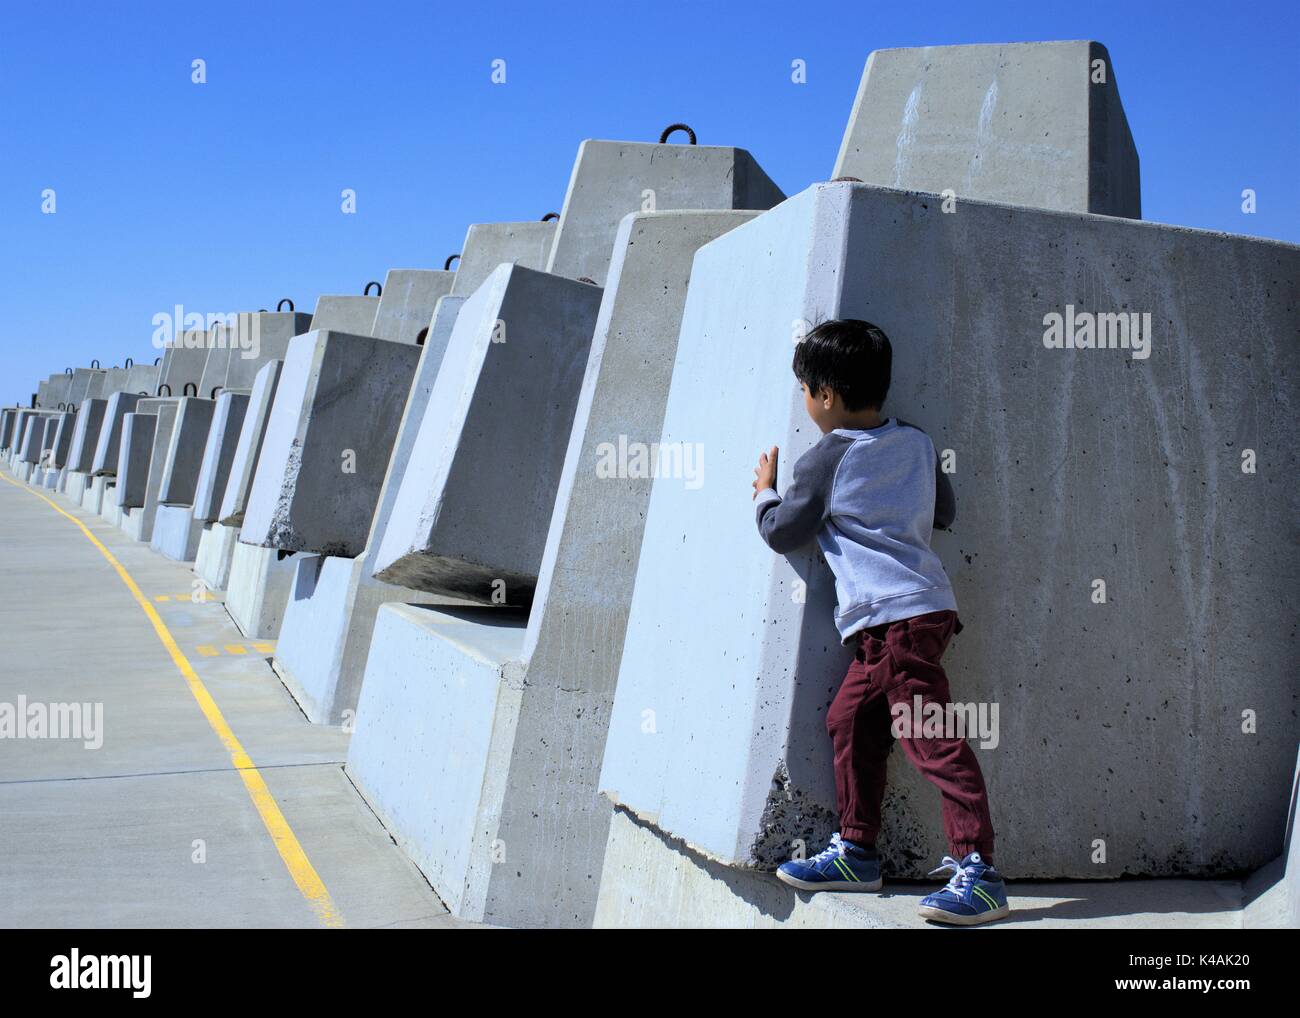 Hide and seek. Boy hiding behind wall, playing hide and seek. Kid peeking out from behind a concrete boulder. Stock Photo